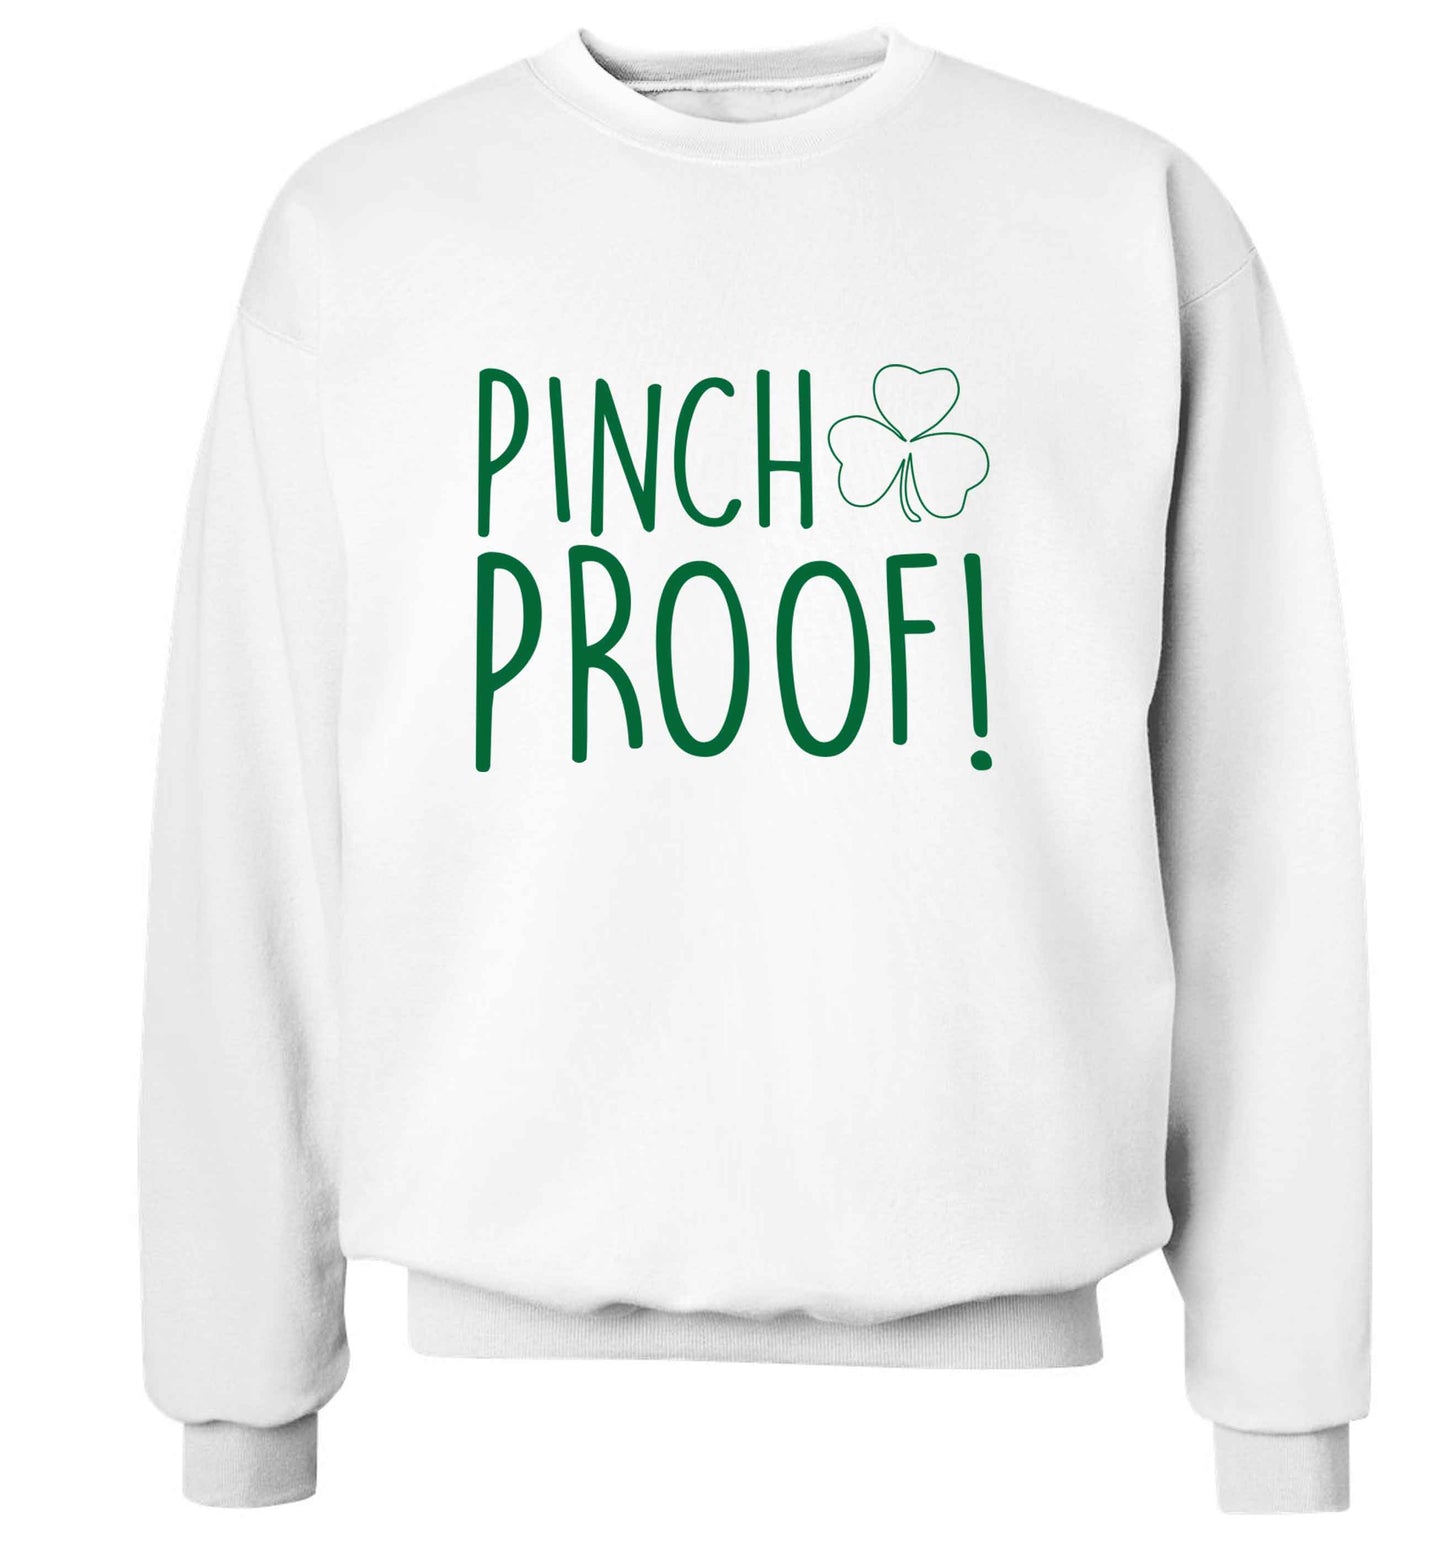 Pinch Proof adult's unisex white sweater 2XL